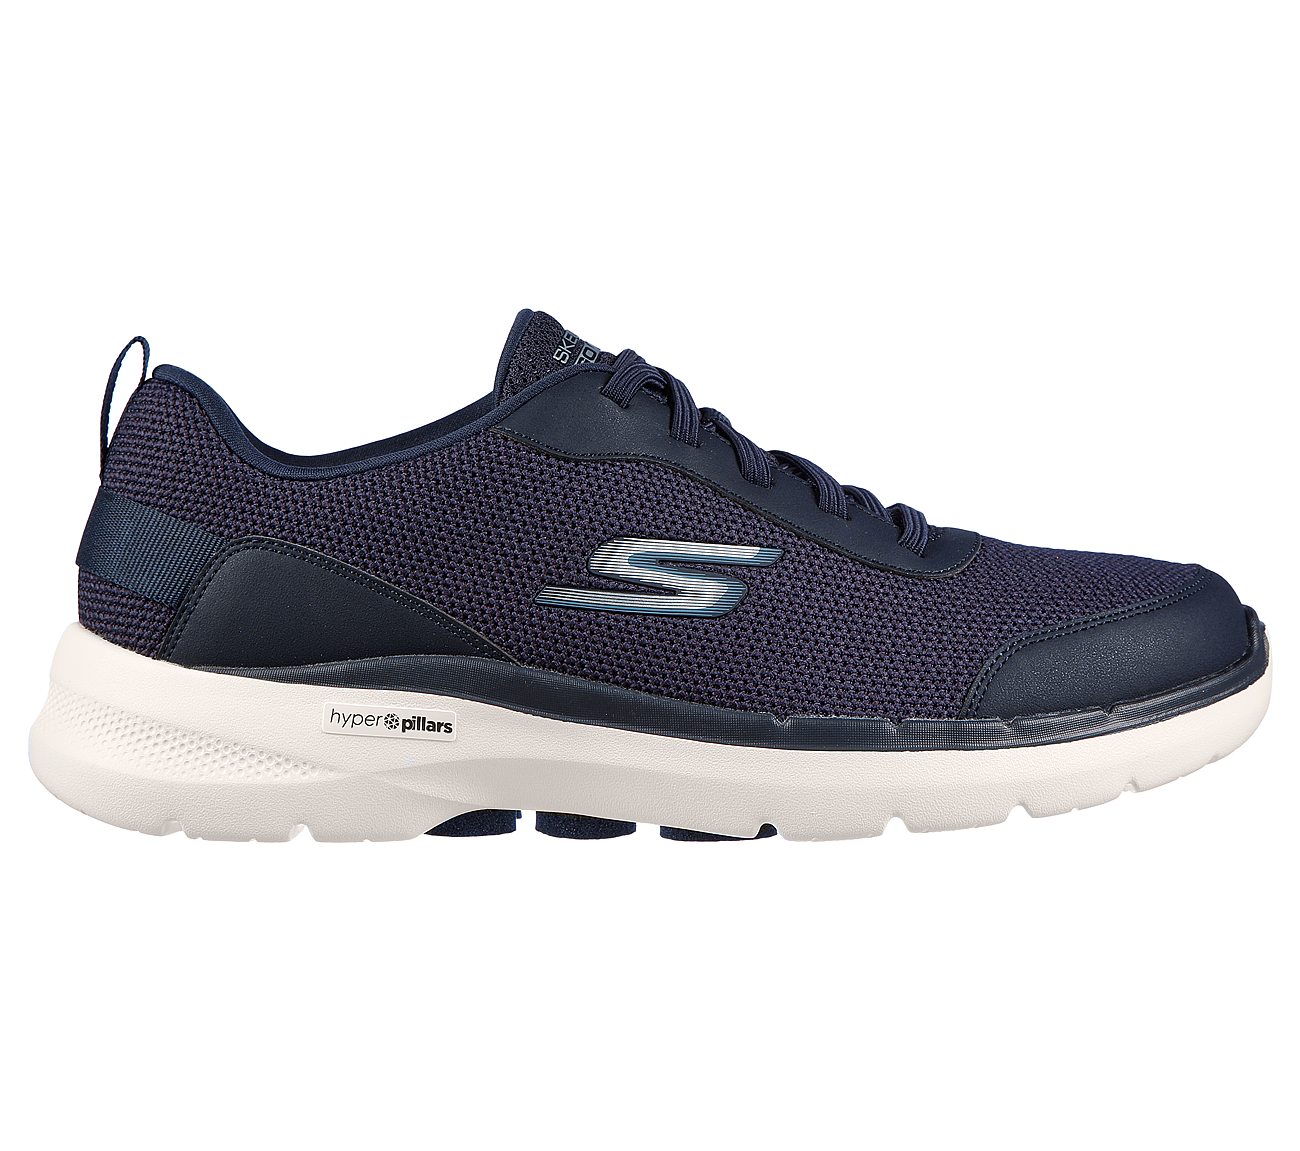 GO WALK 6 - BOLD KNIGHT, NAVY/BLUE Footwear Lateral View